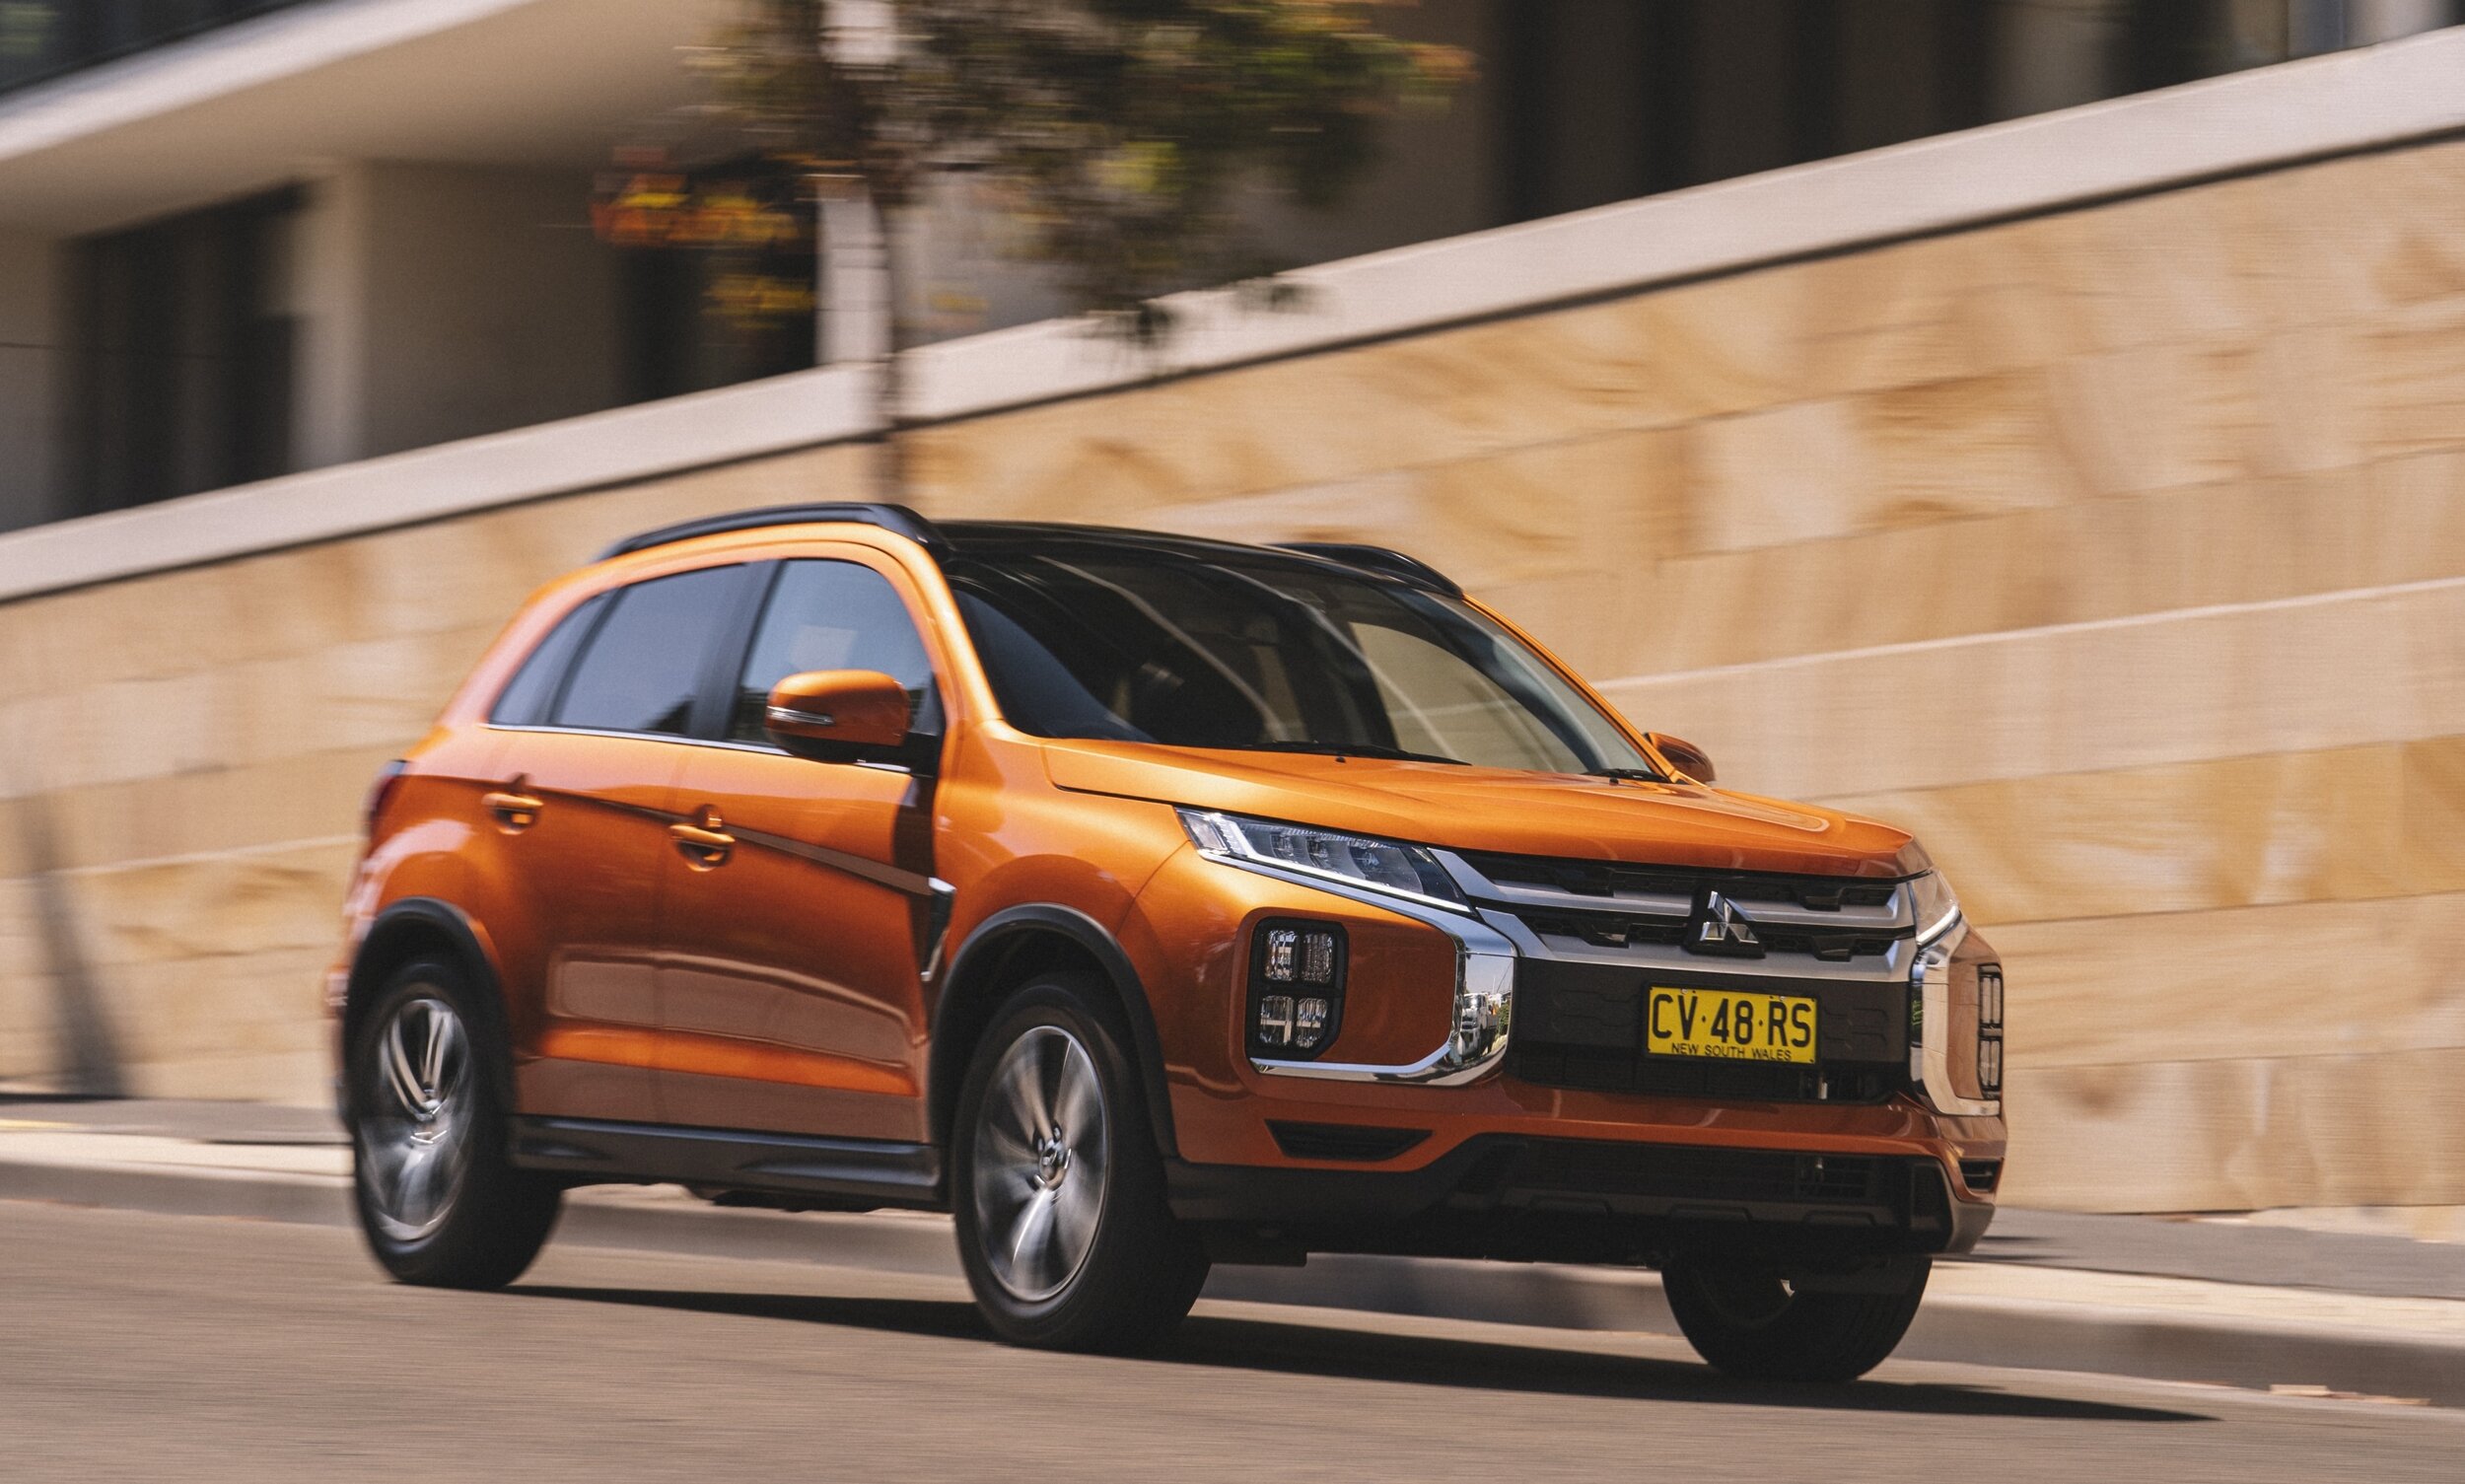 2020 Mitsubishi ASX Is Proof That You Can't Teach An Old Dog New Tricks